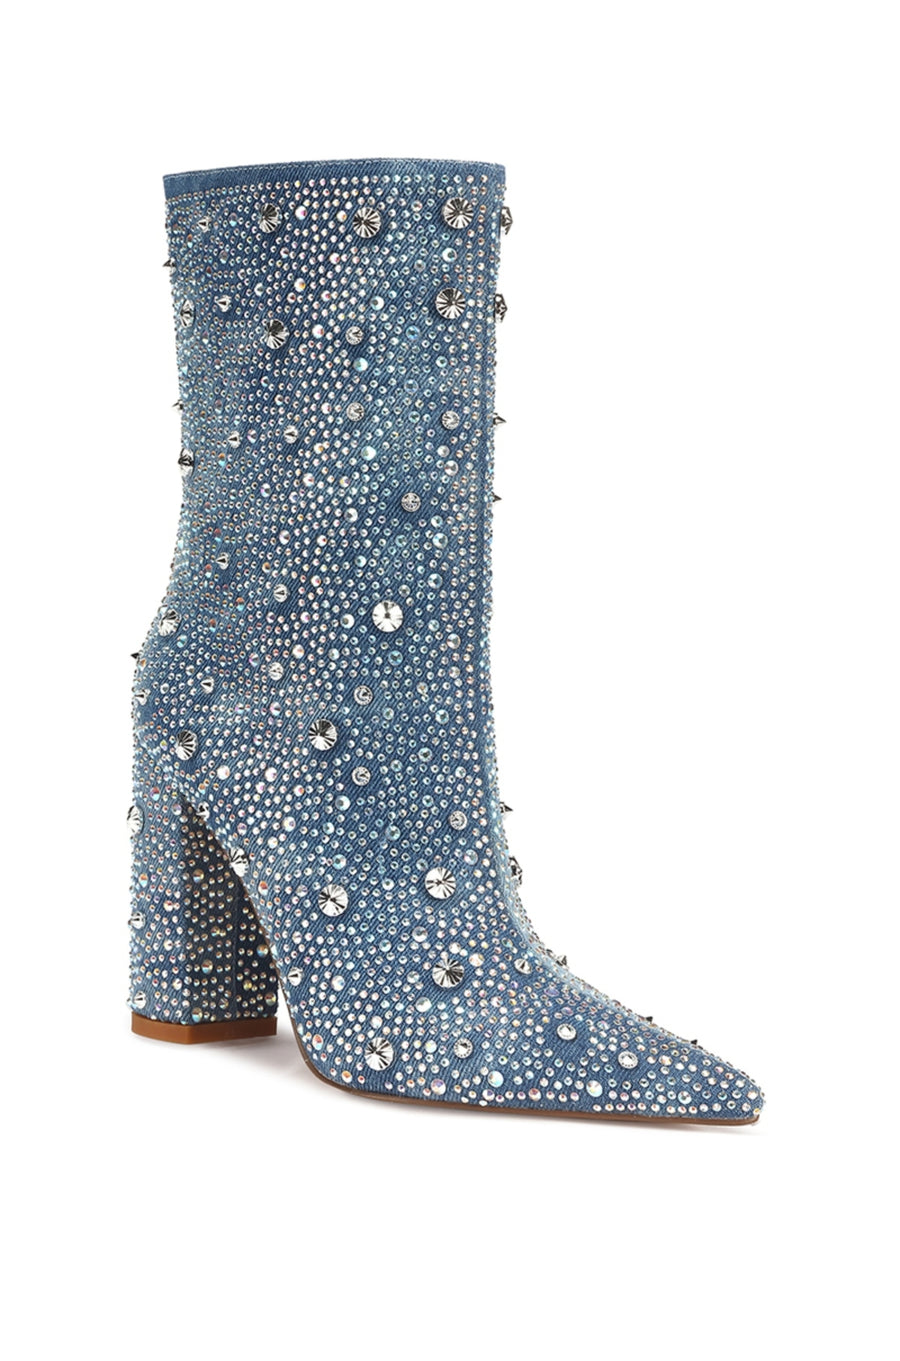 angled view of denim ankle bootie with a pointed toe, block heel, and rhinestone embellishments